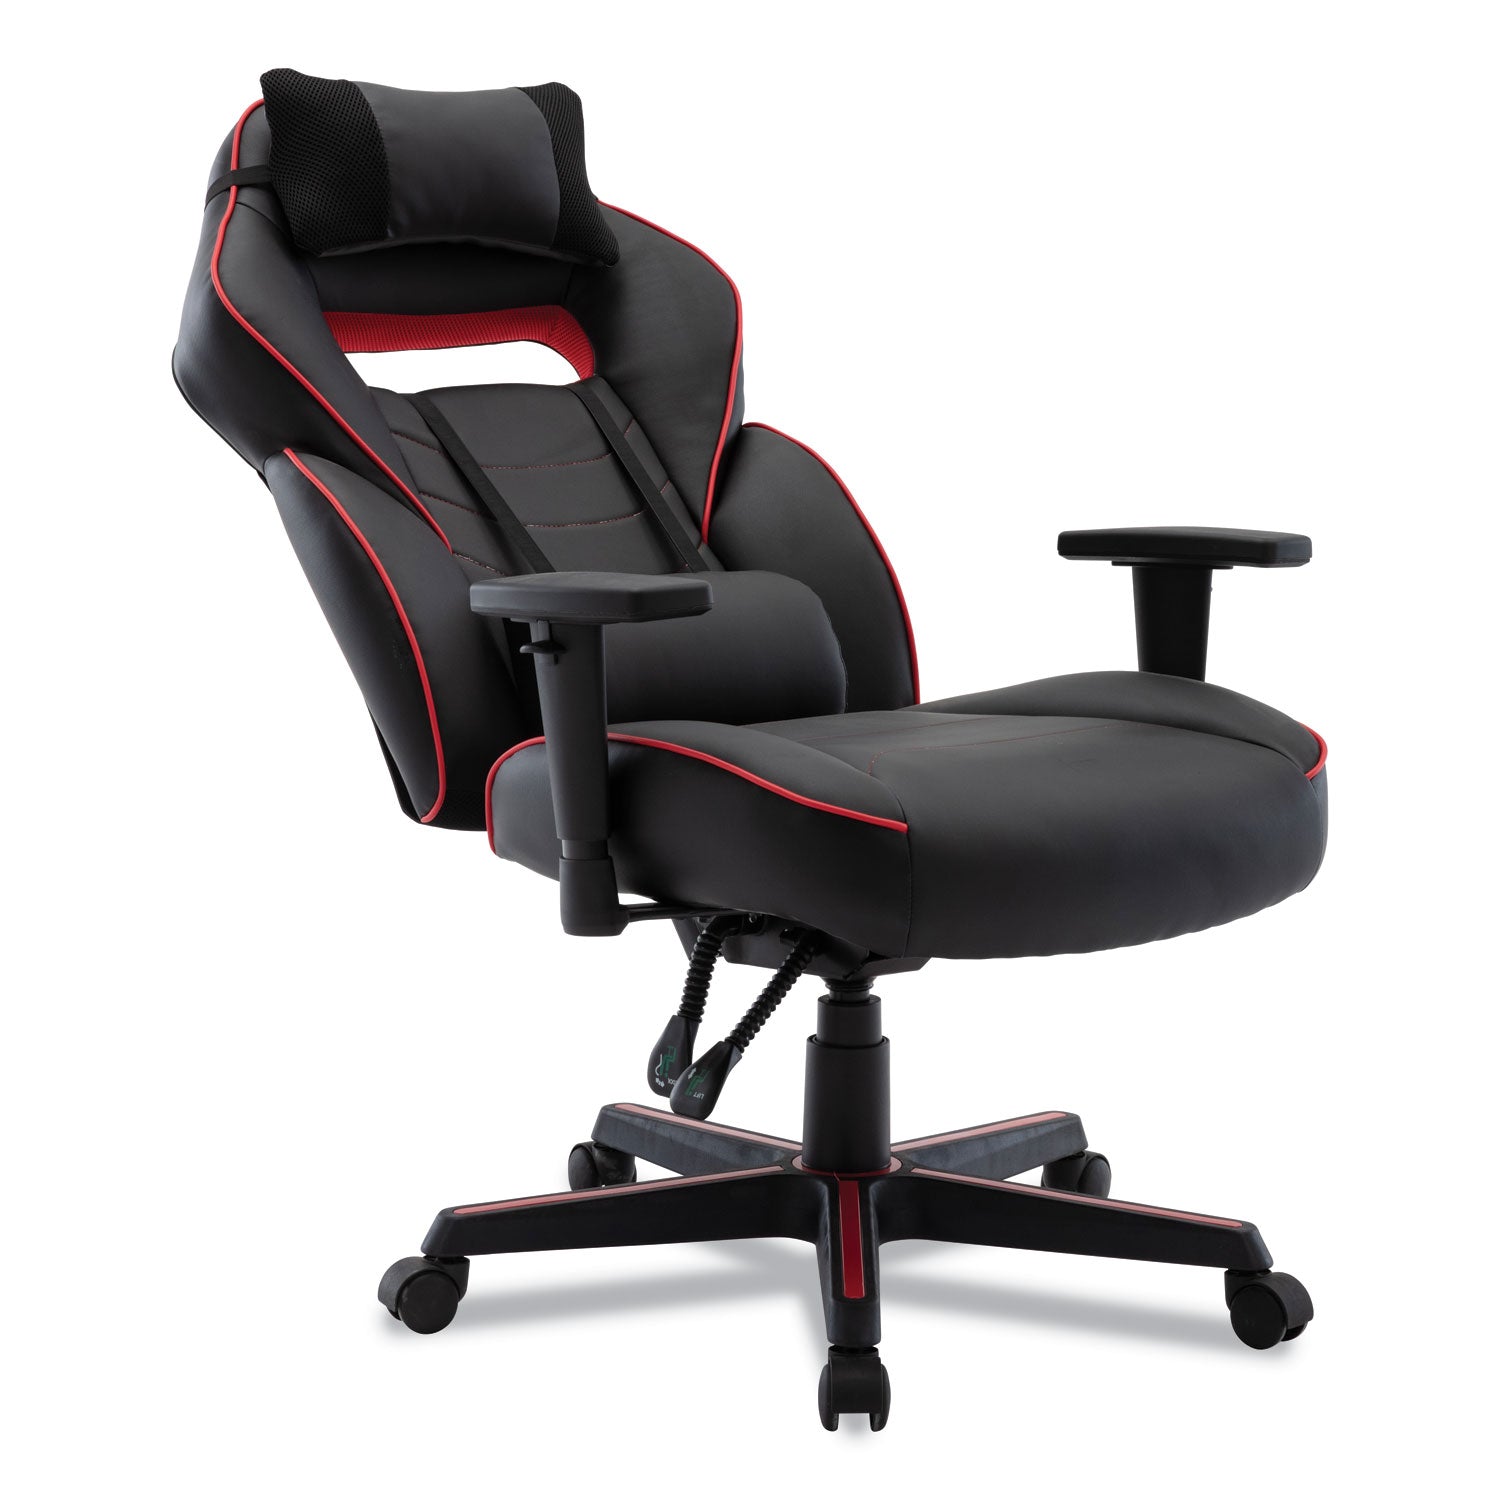 racing-style-ergonomic-gaming-chair-supports-275-lb-1591-to-198-seat-height-black-red-trim-seat-back-black-red-base_alegm4136 - 8